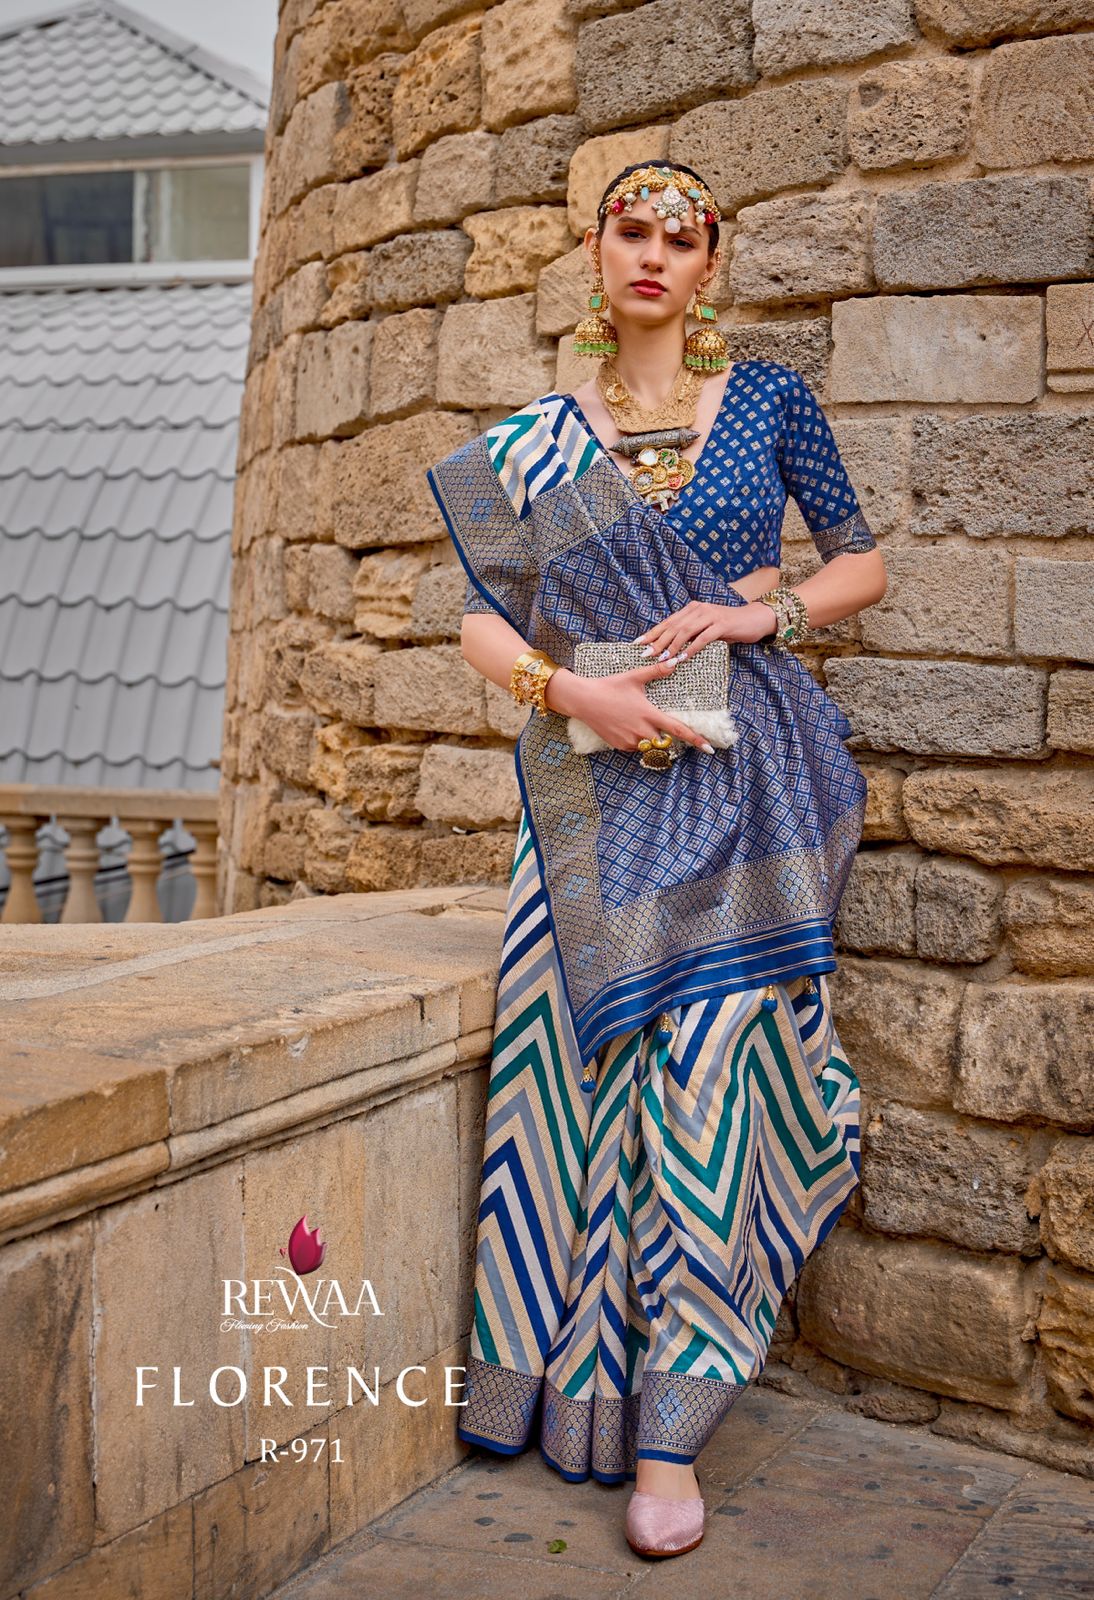 Rewaa Florence collection 2